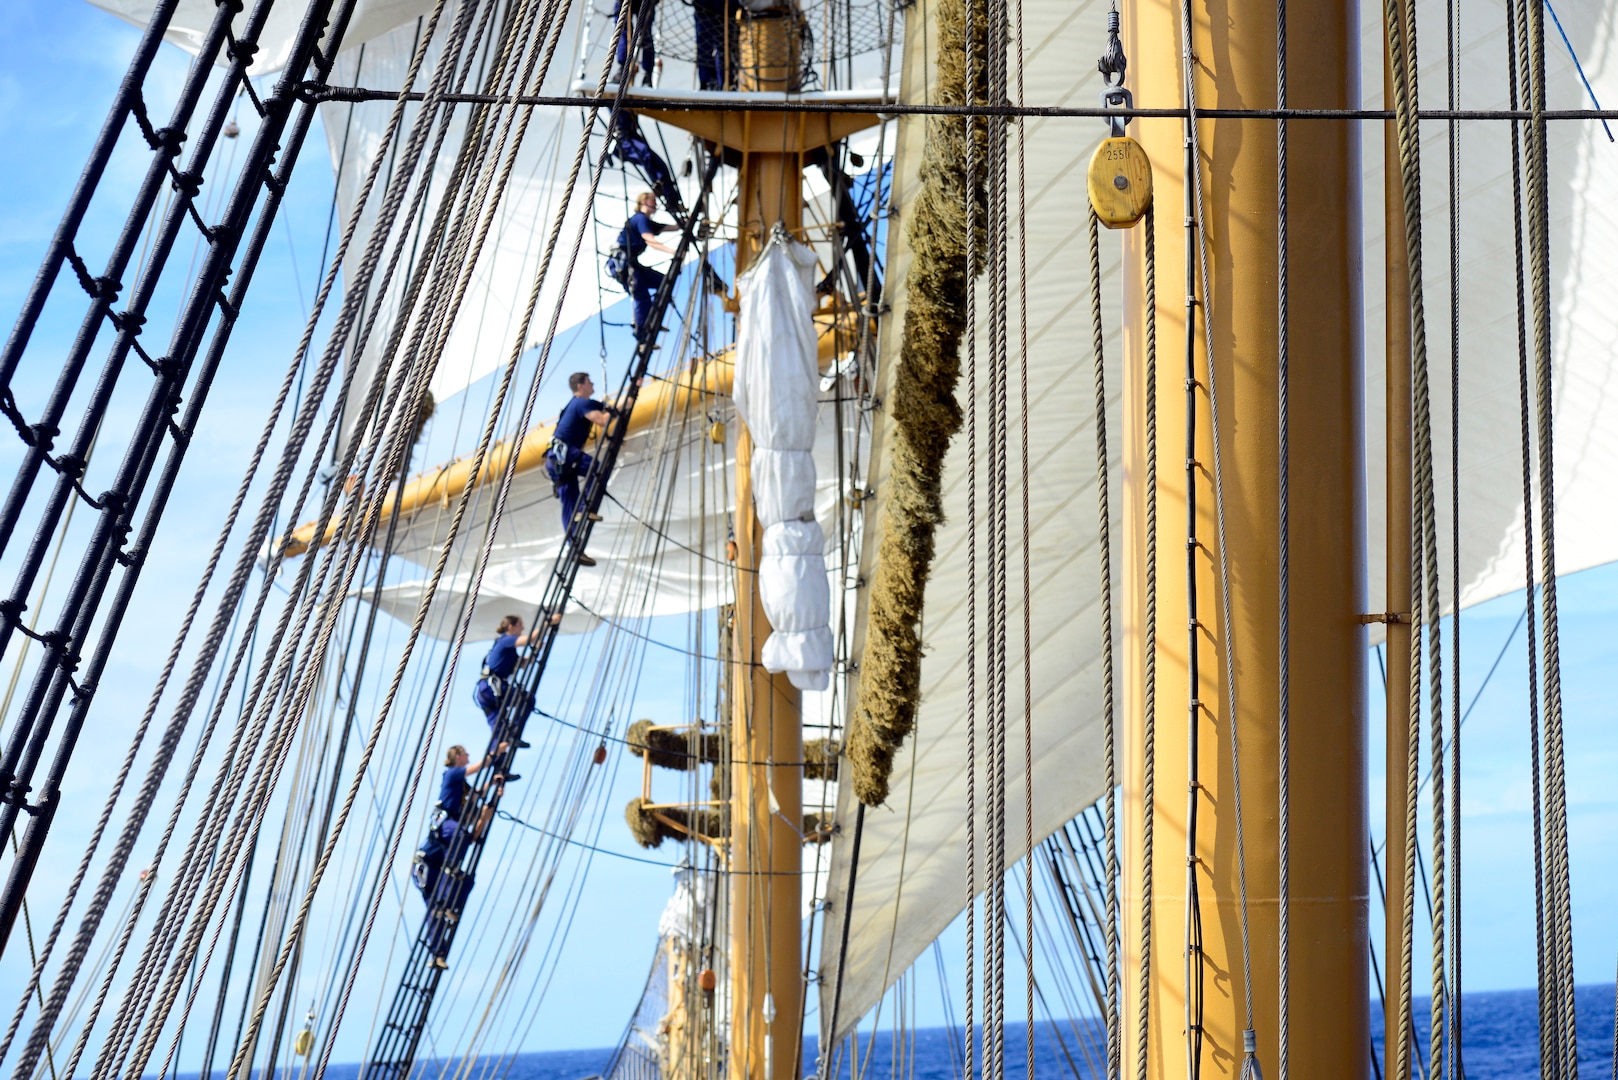 The crew and Coast Guard Academy cadets assigned to Coast Guard Cutter Eagle set sail stations in the Caribbean Sea on May 31, 2018. The 295-foot Barque Eagle is the flagship of the U.S. Coast Guard and serves as a training vessel for cadets at the Coast Guard Academy.